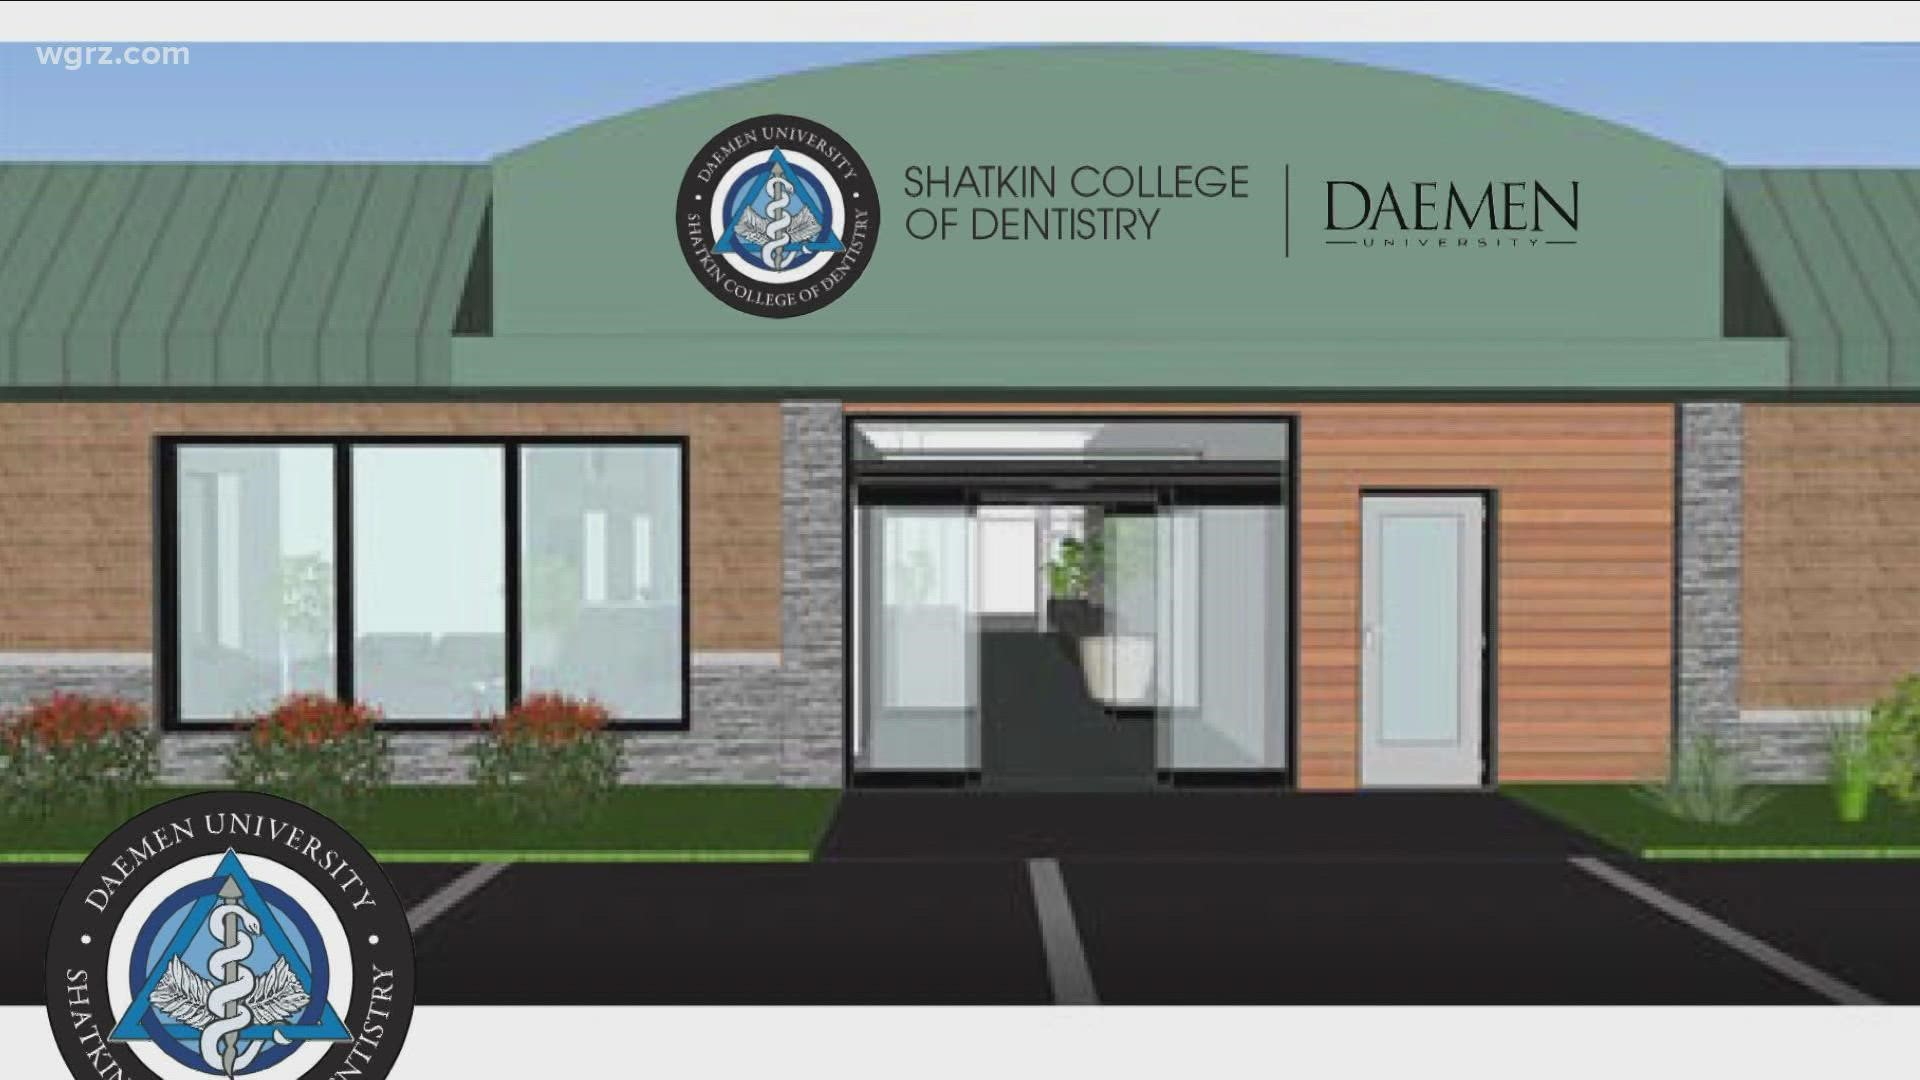 Daemen University Hoping To Open College of Dentistry